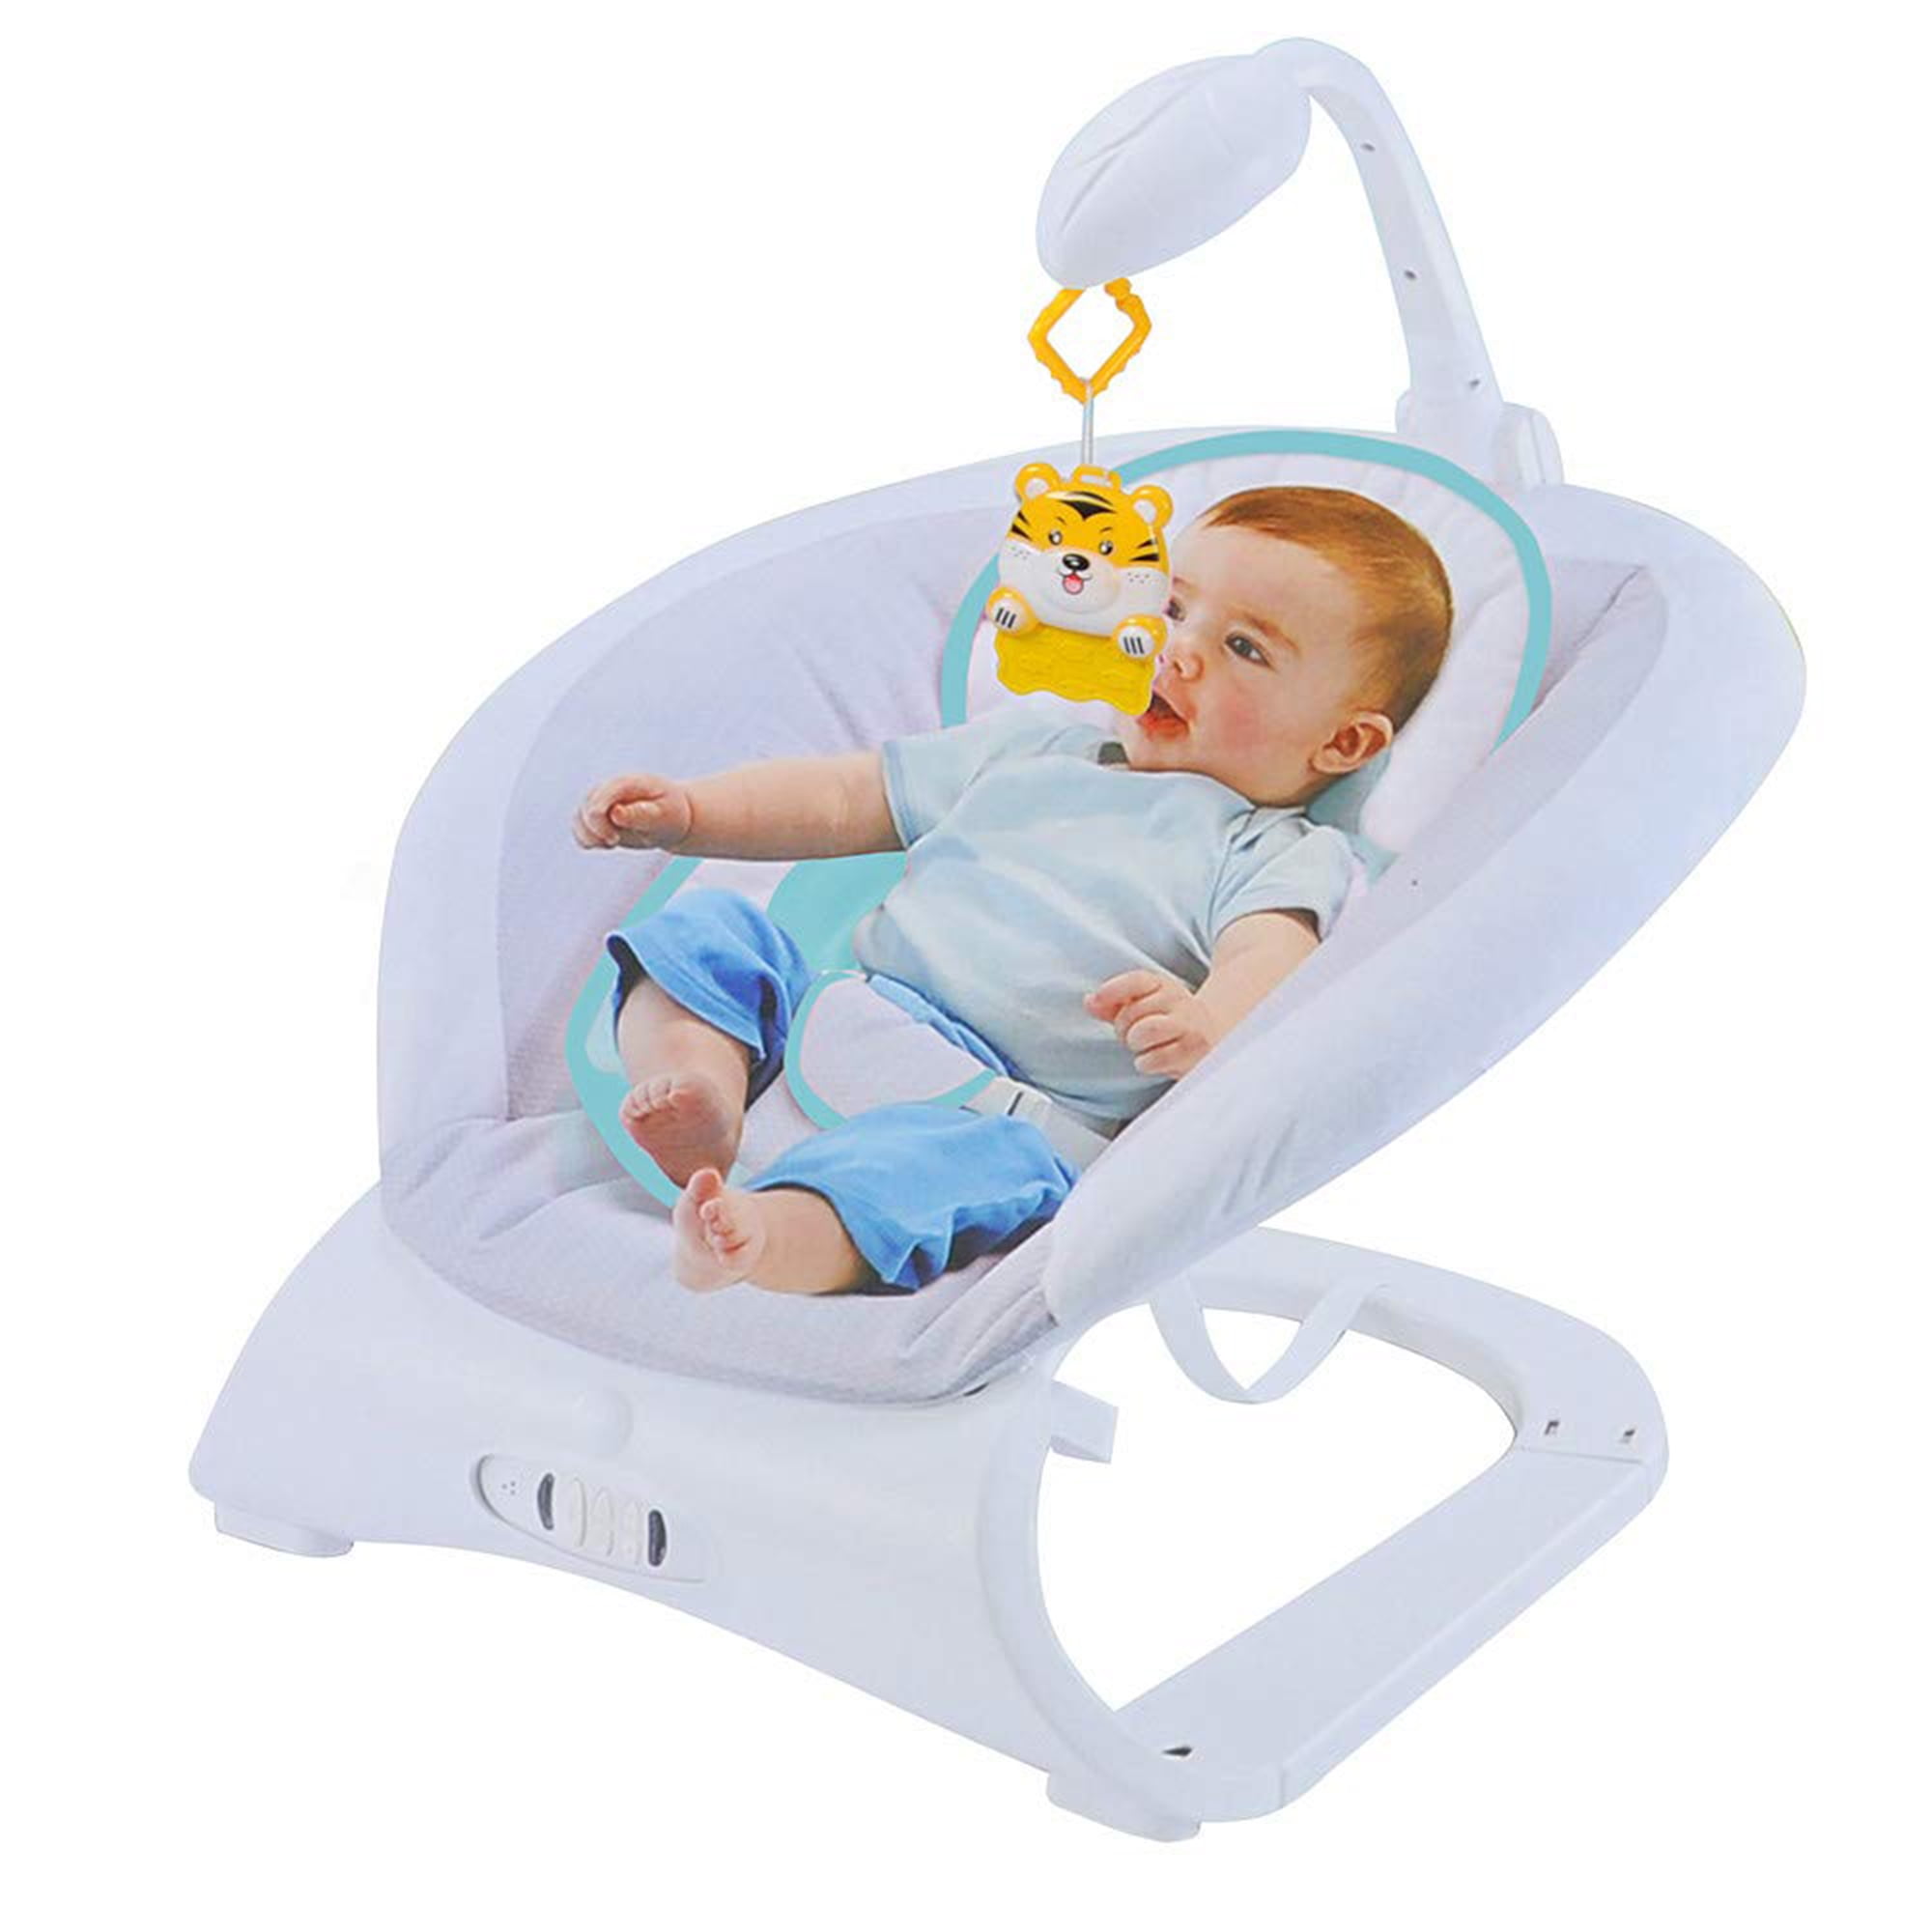 Bouncer For Baby Chair Seat Girl Boy Vibrating Soothing Fun Play Activity Center 